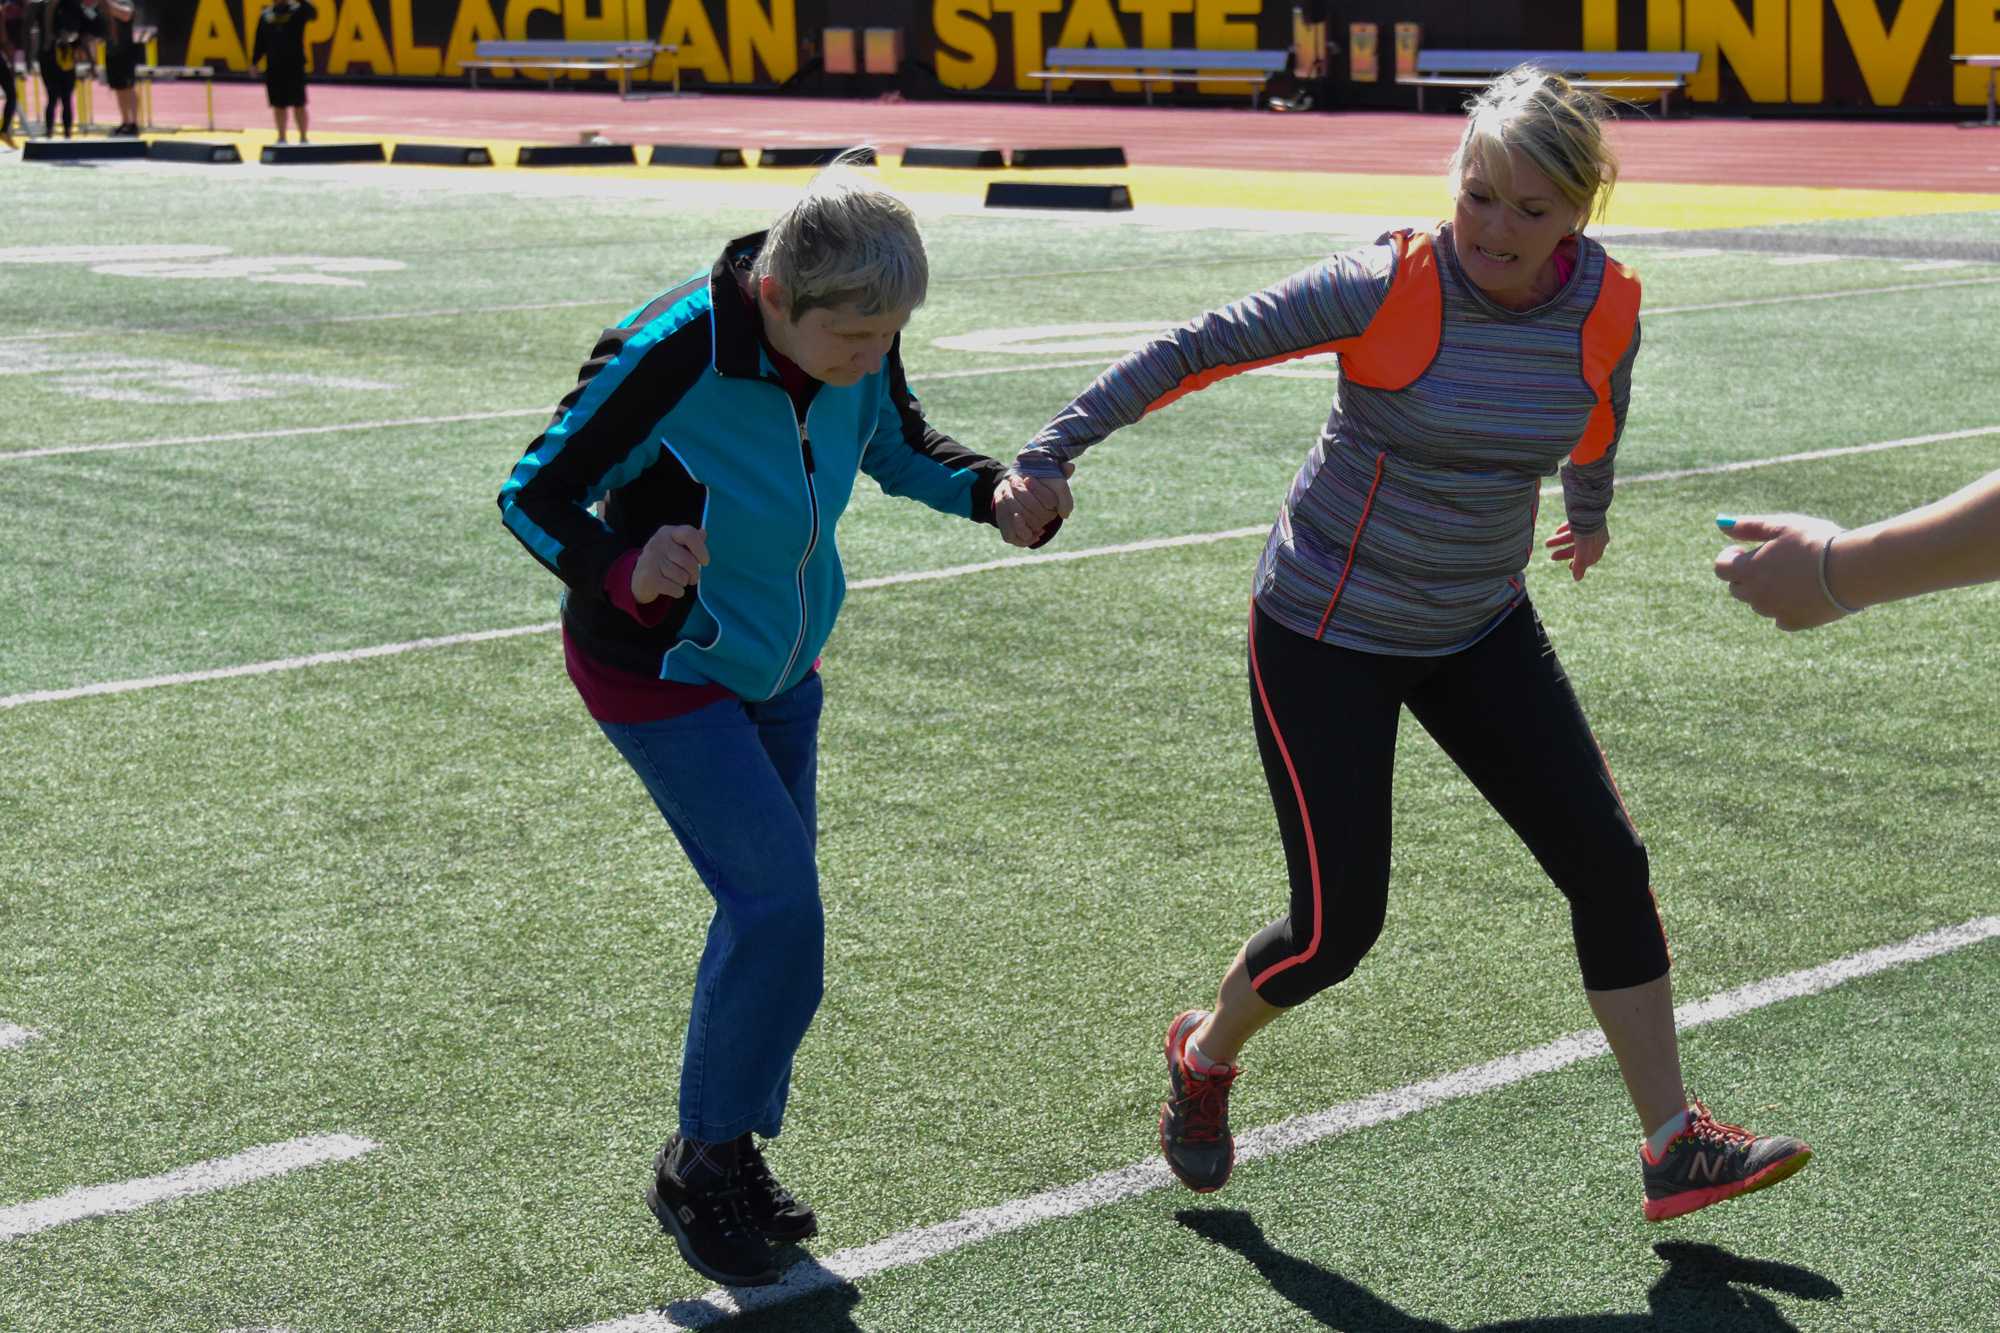 Karen Poteat assists Ava Trivette in the long jump during track and field practice. Photo by Lee Sanderlin.